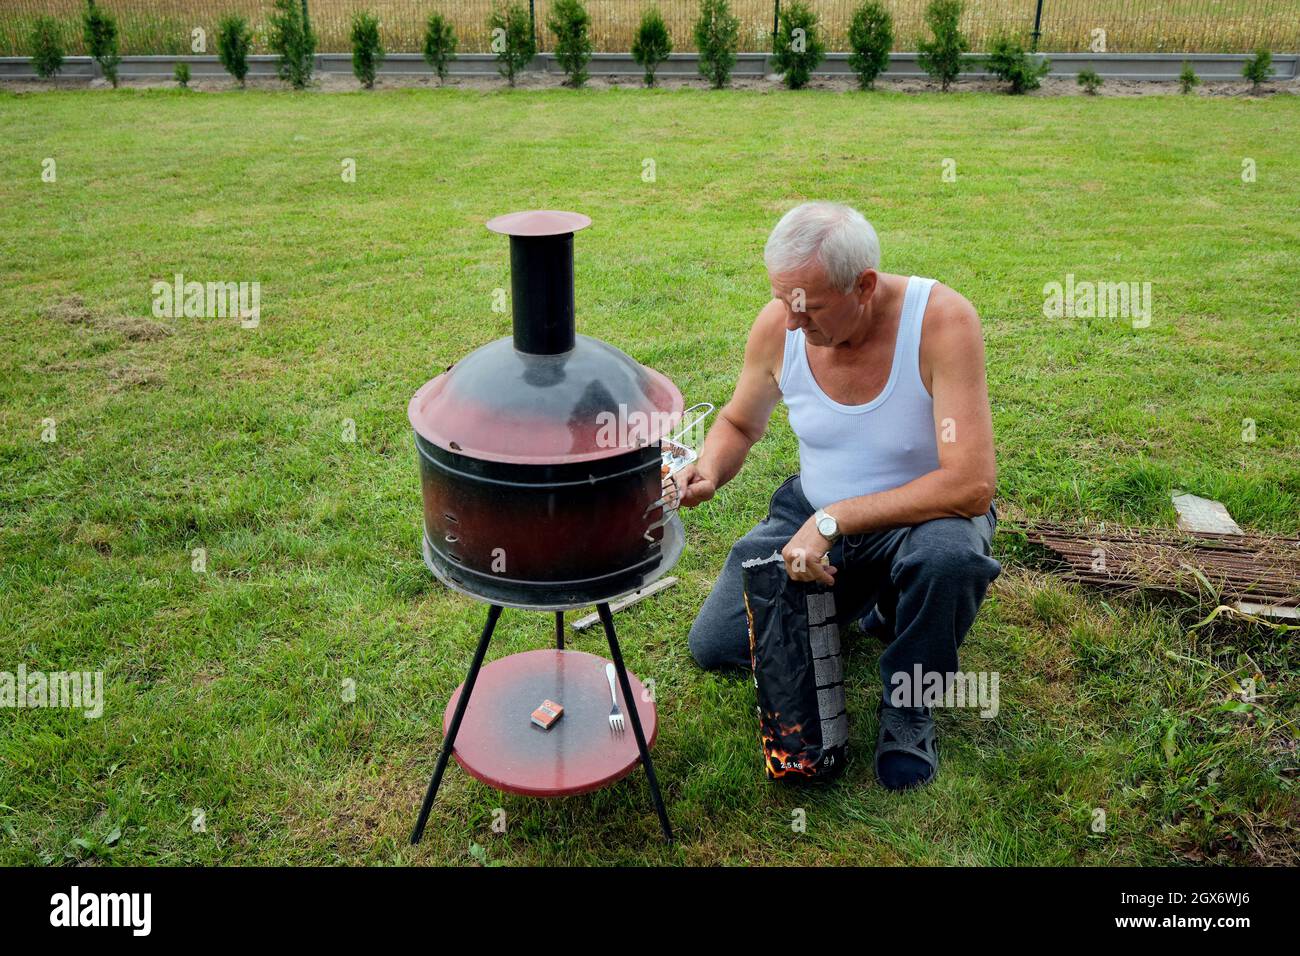 a senior man is kneeling at a barbecue outdoors against a background of green grass Stock Photo